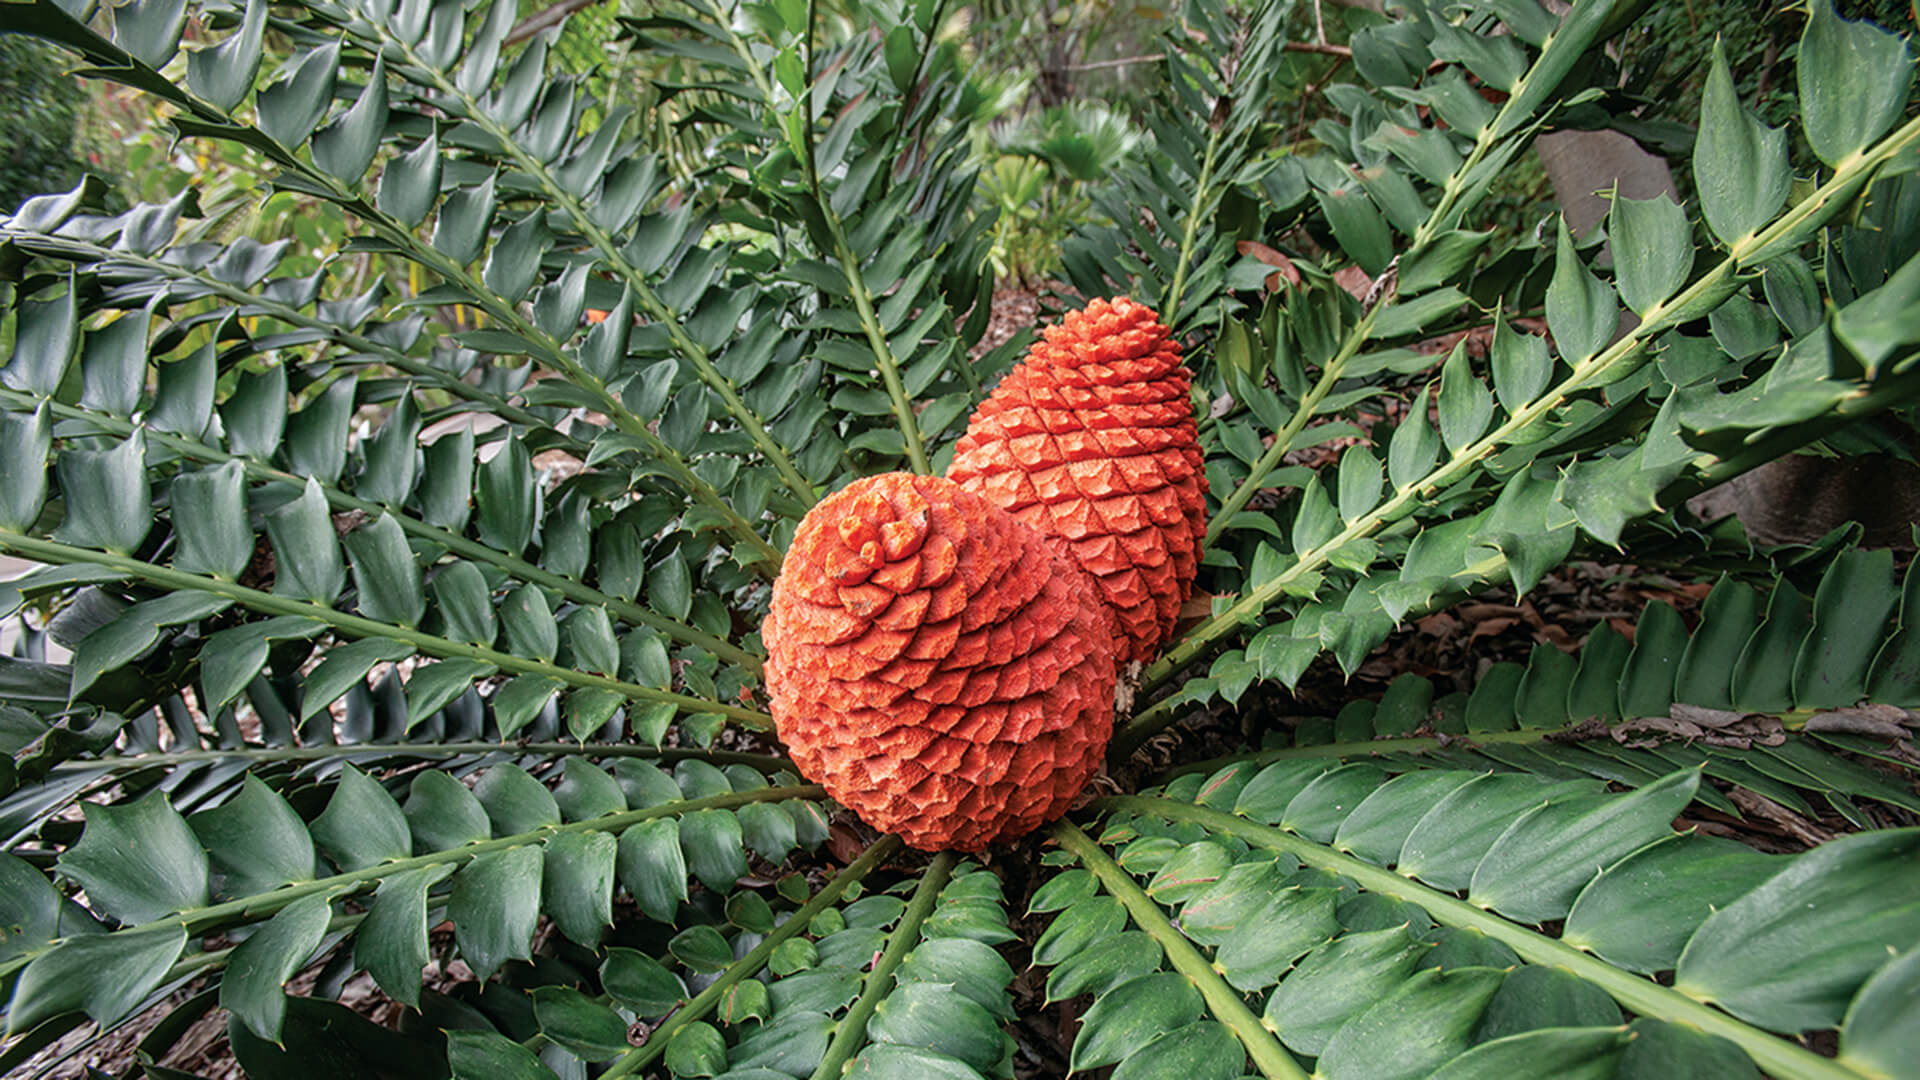 Cycad photo showing two cones.